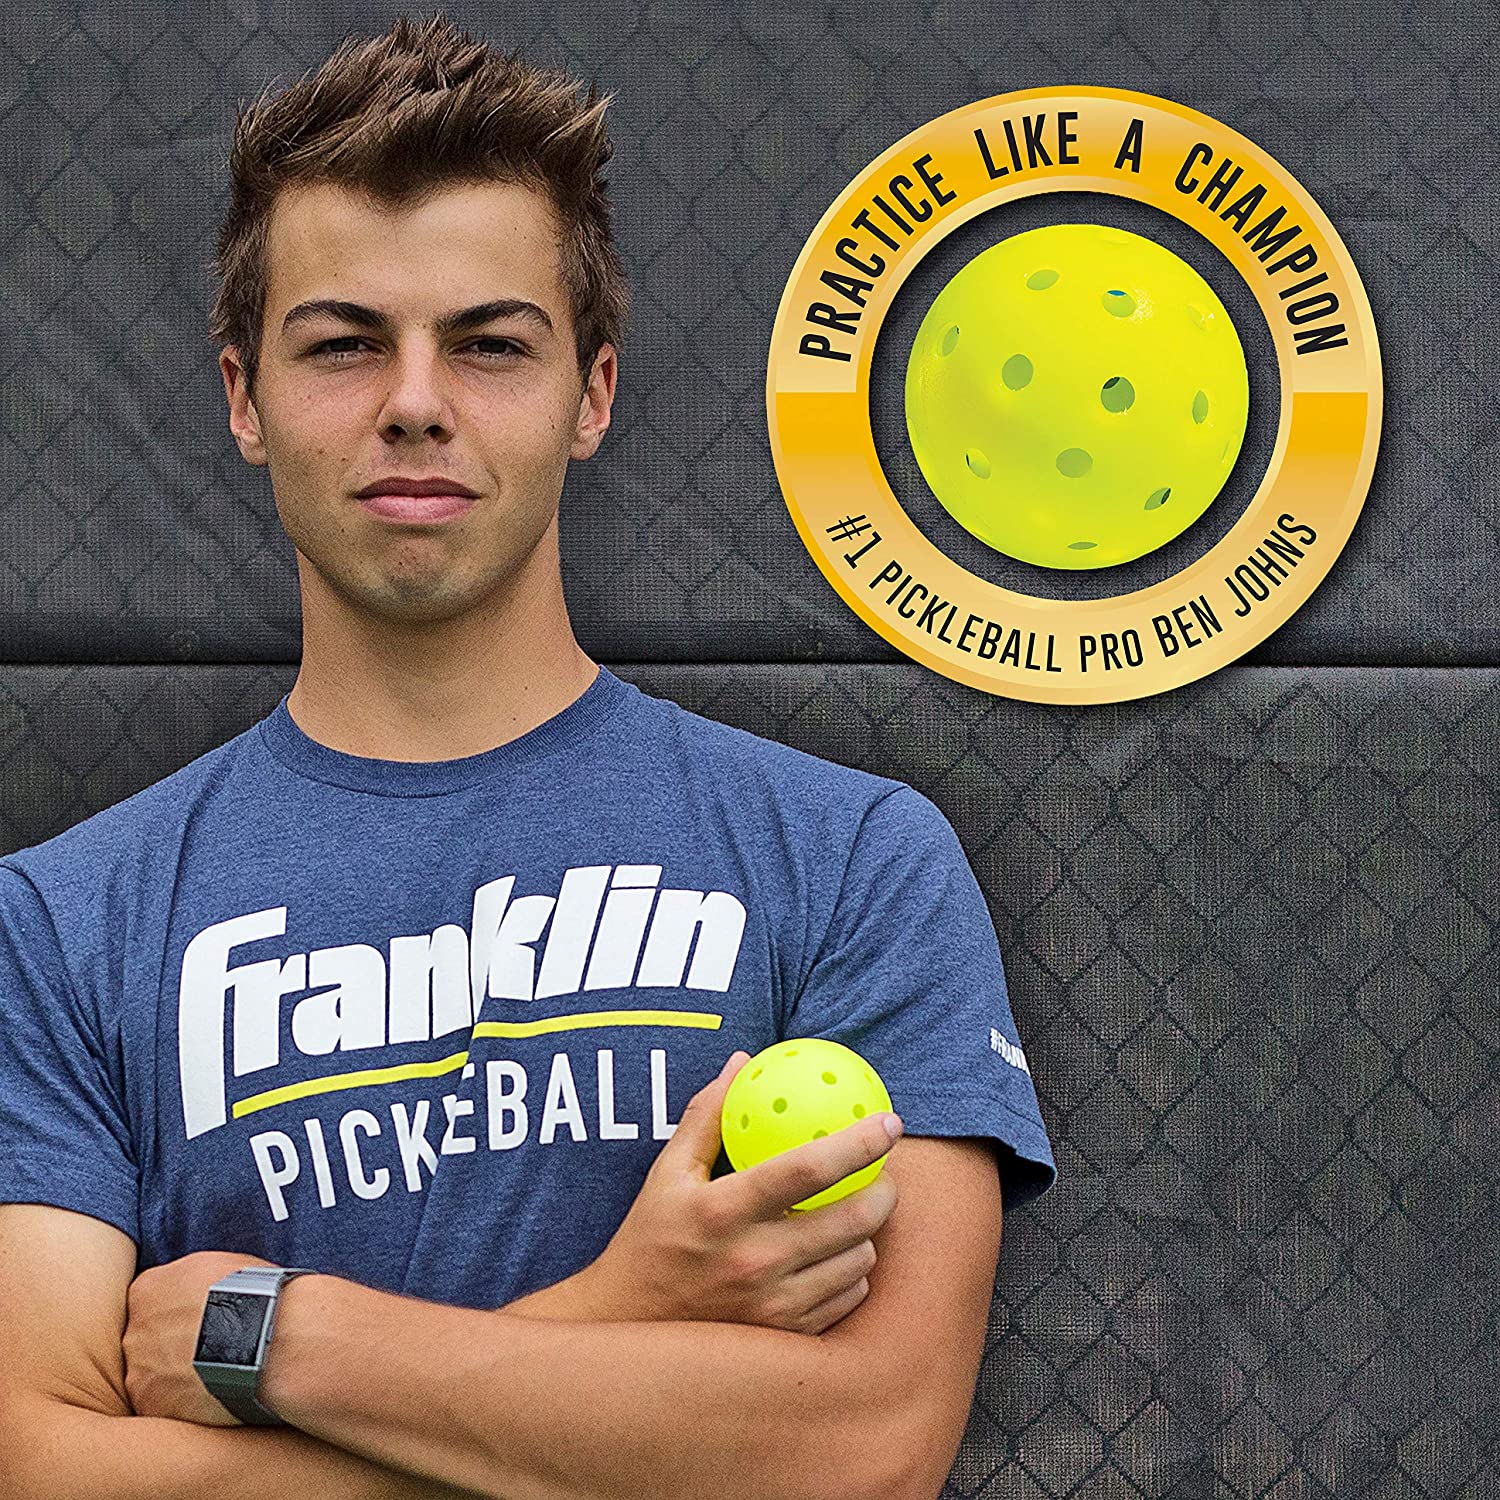 Franklin X-40 Outdoor Pickleball Balls - practice like a champion.